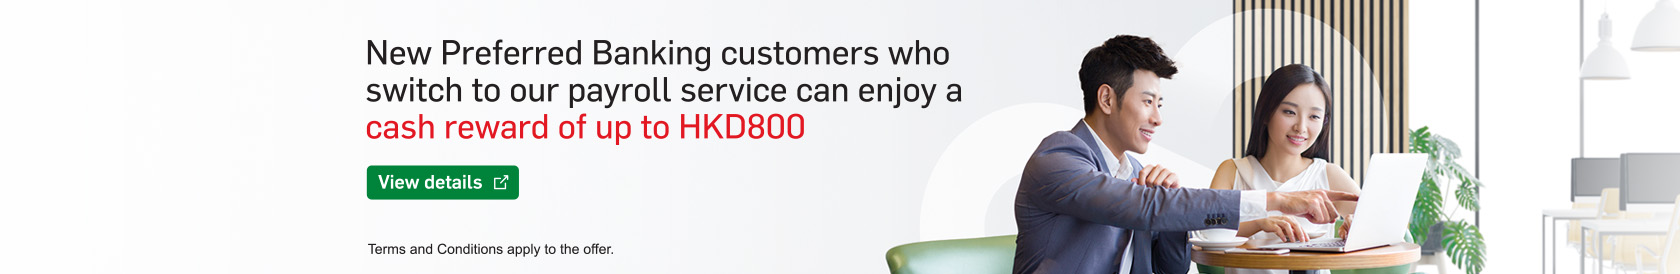 New Preferred Banking customers who switch to our payroll service can enjoy a cash reward of up to HKD800